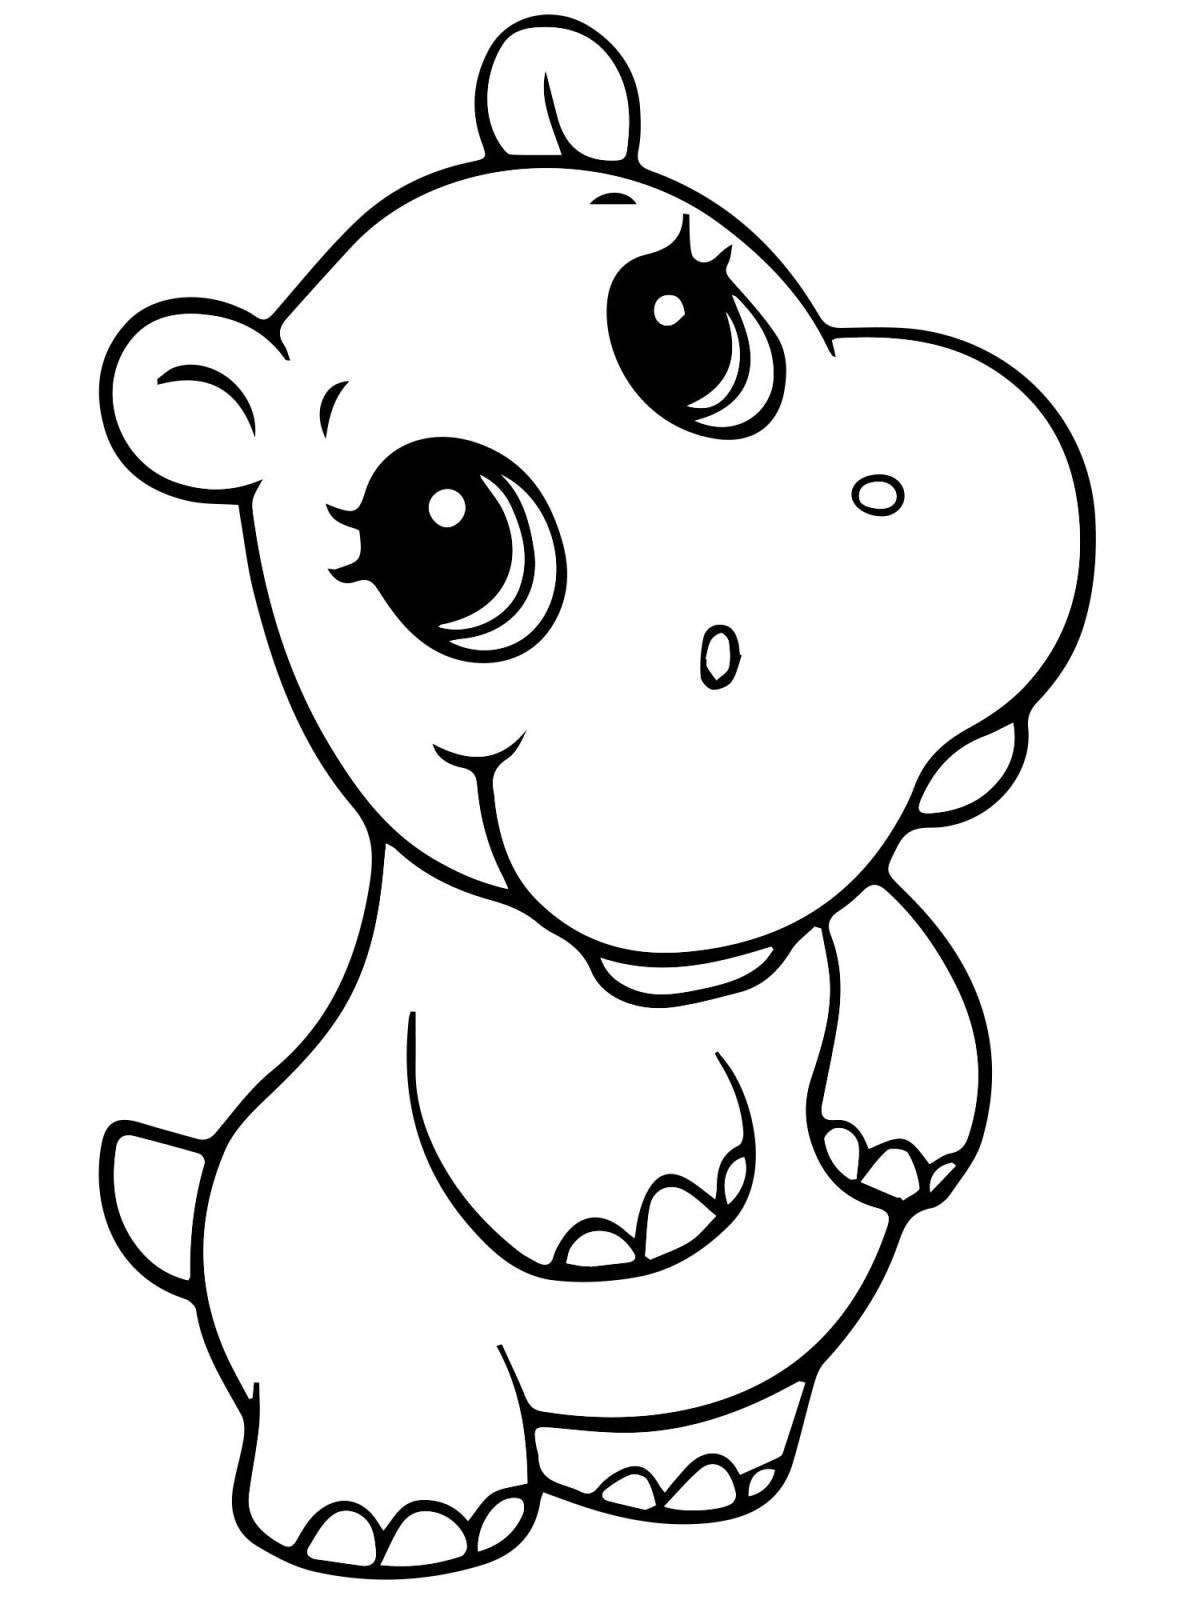 Animated coloring pages animals for children 5-6 years old